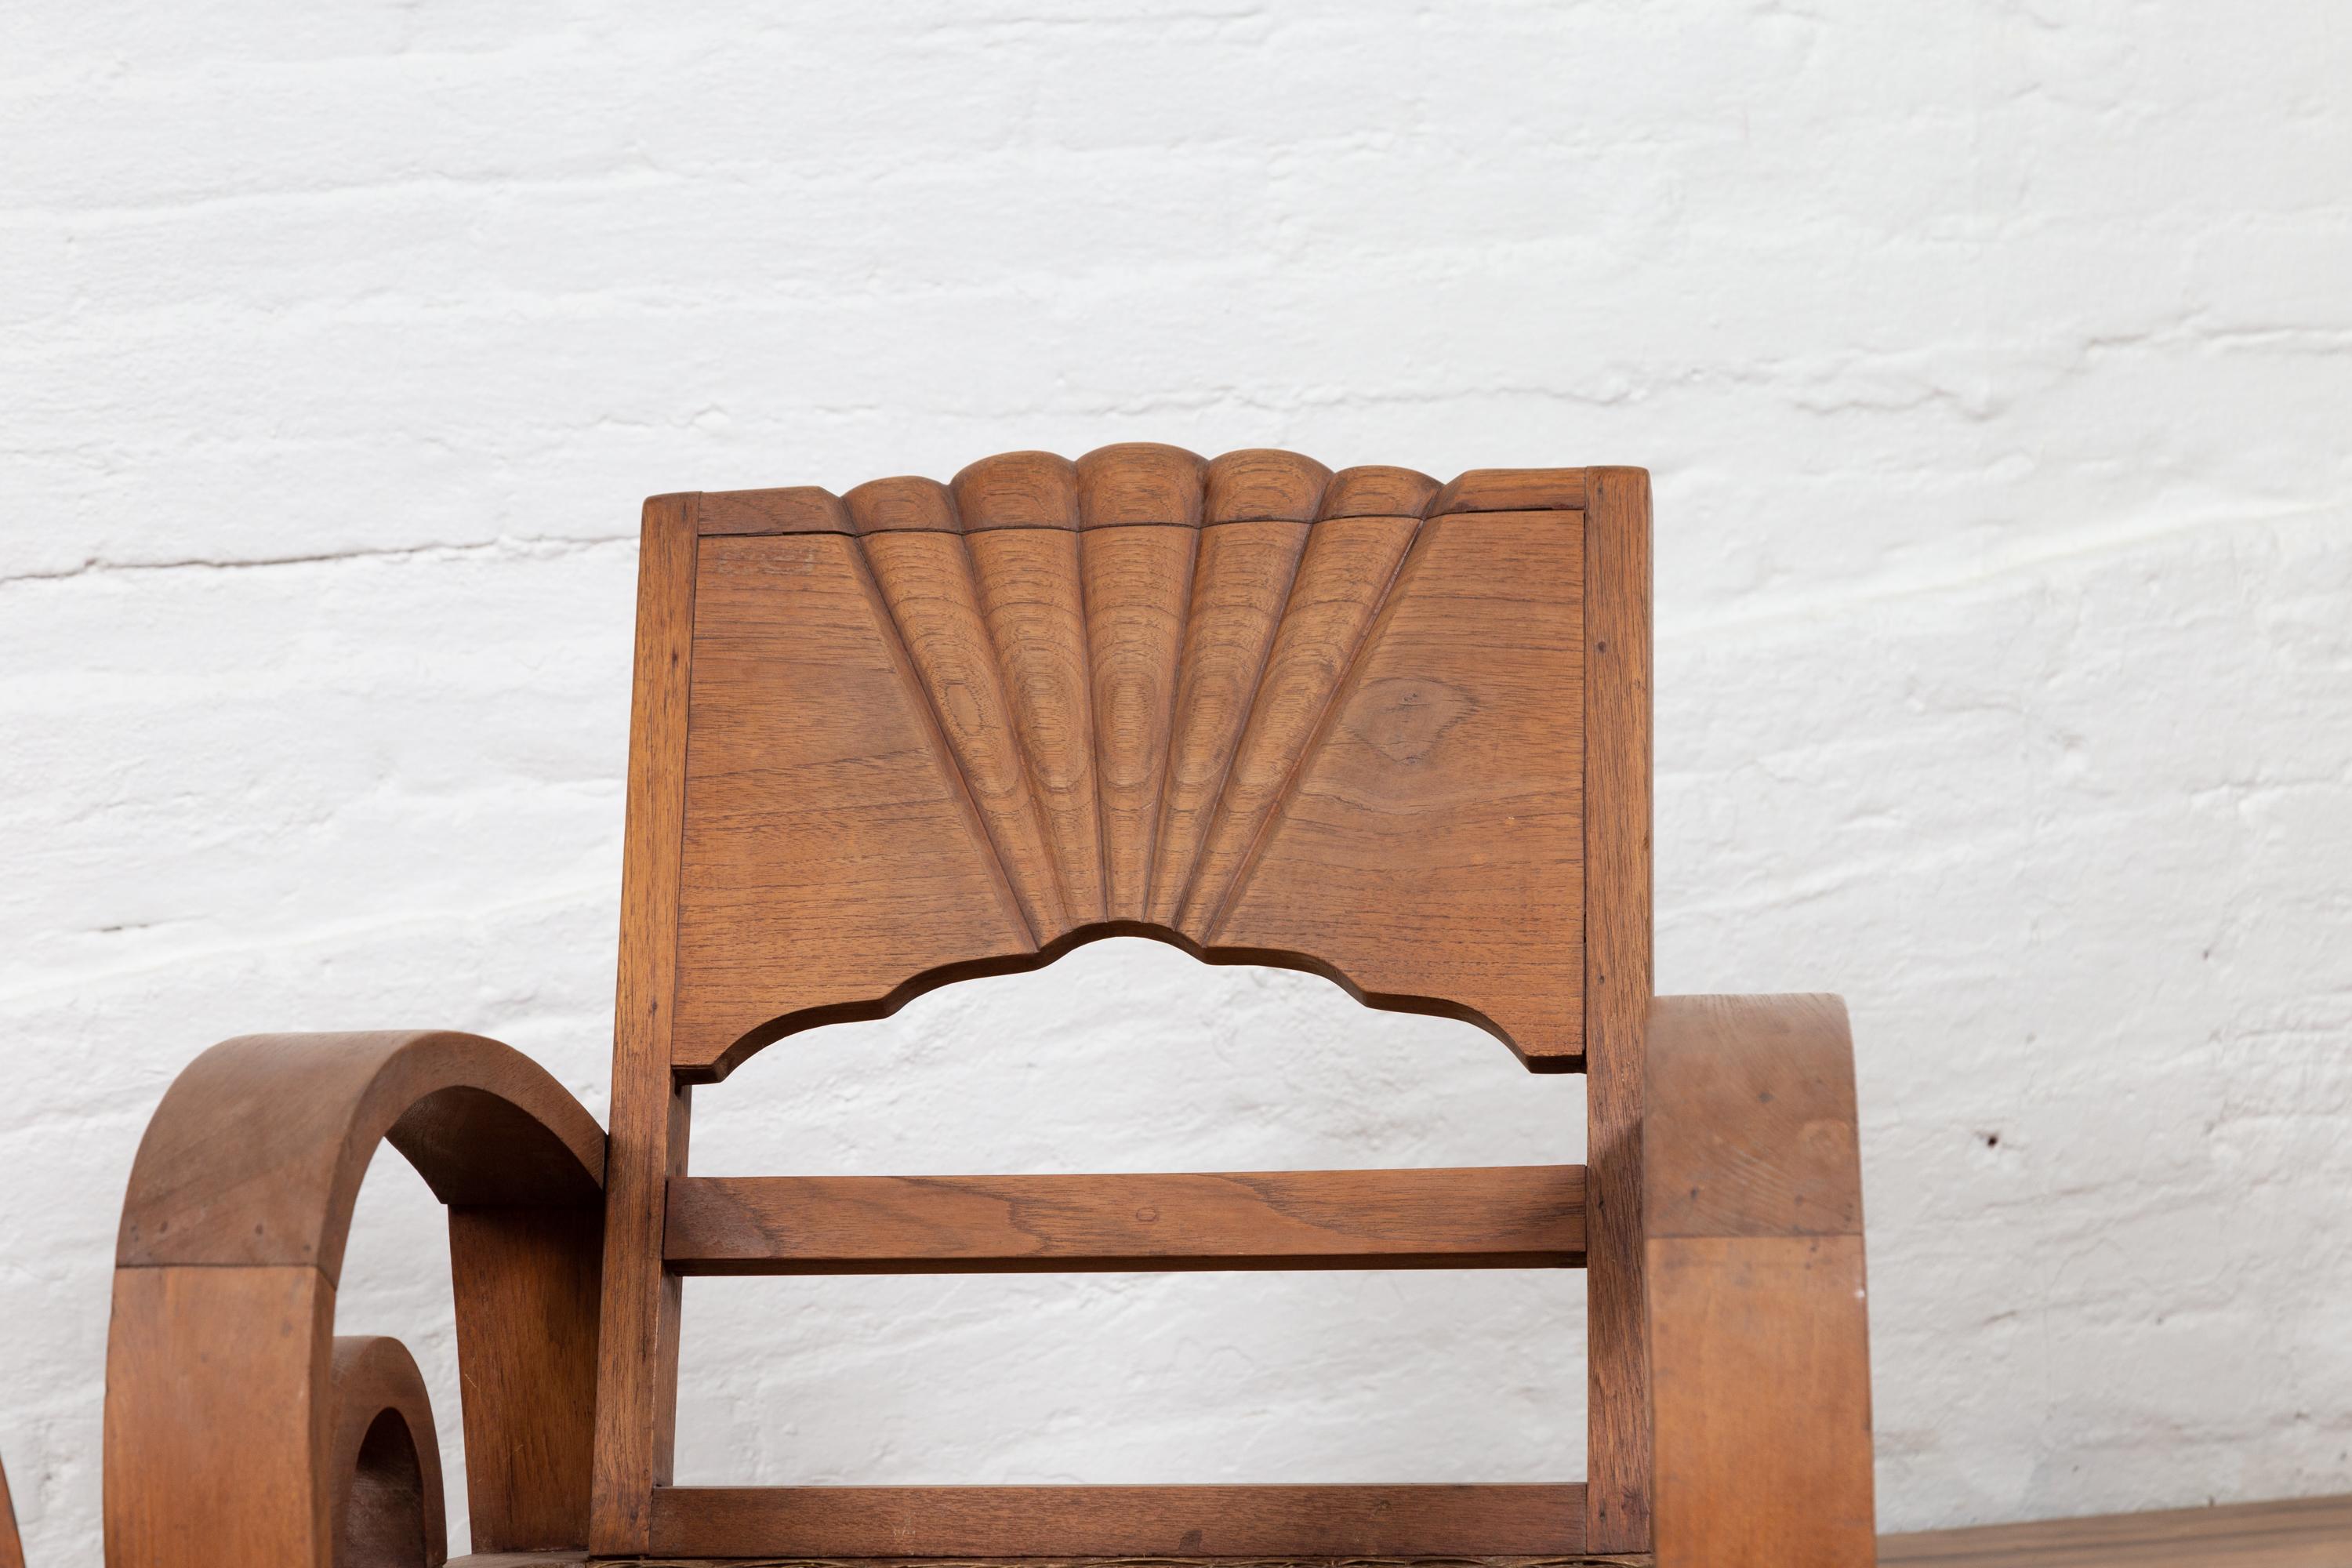 20th Century Pair of Teak Wood Country Chairs from Madura with Rattan Seats and Looping Arms